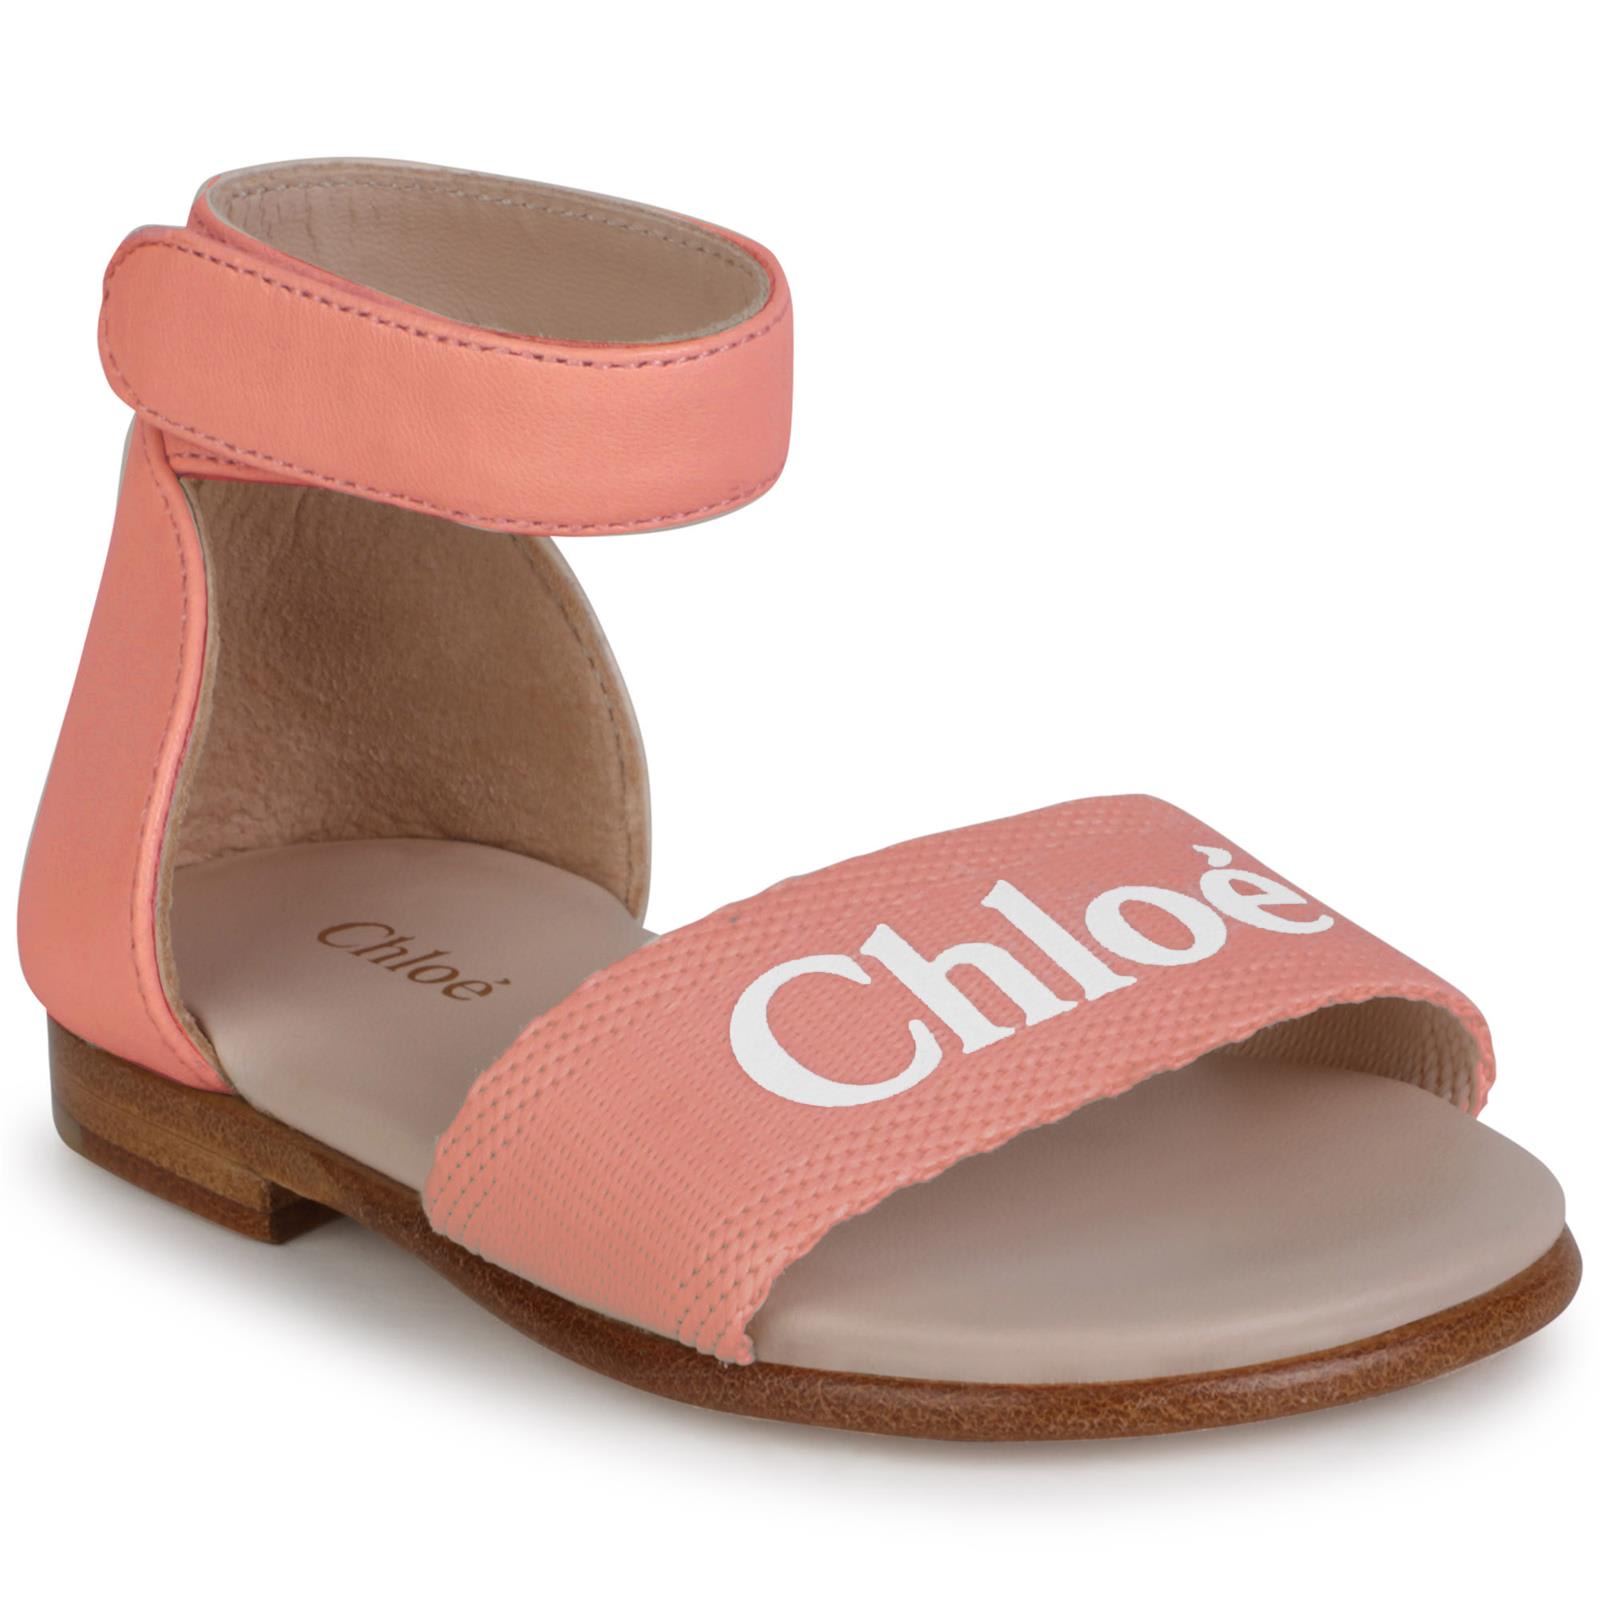 CHLOÉ SANDALS WITH LOGO